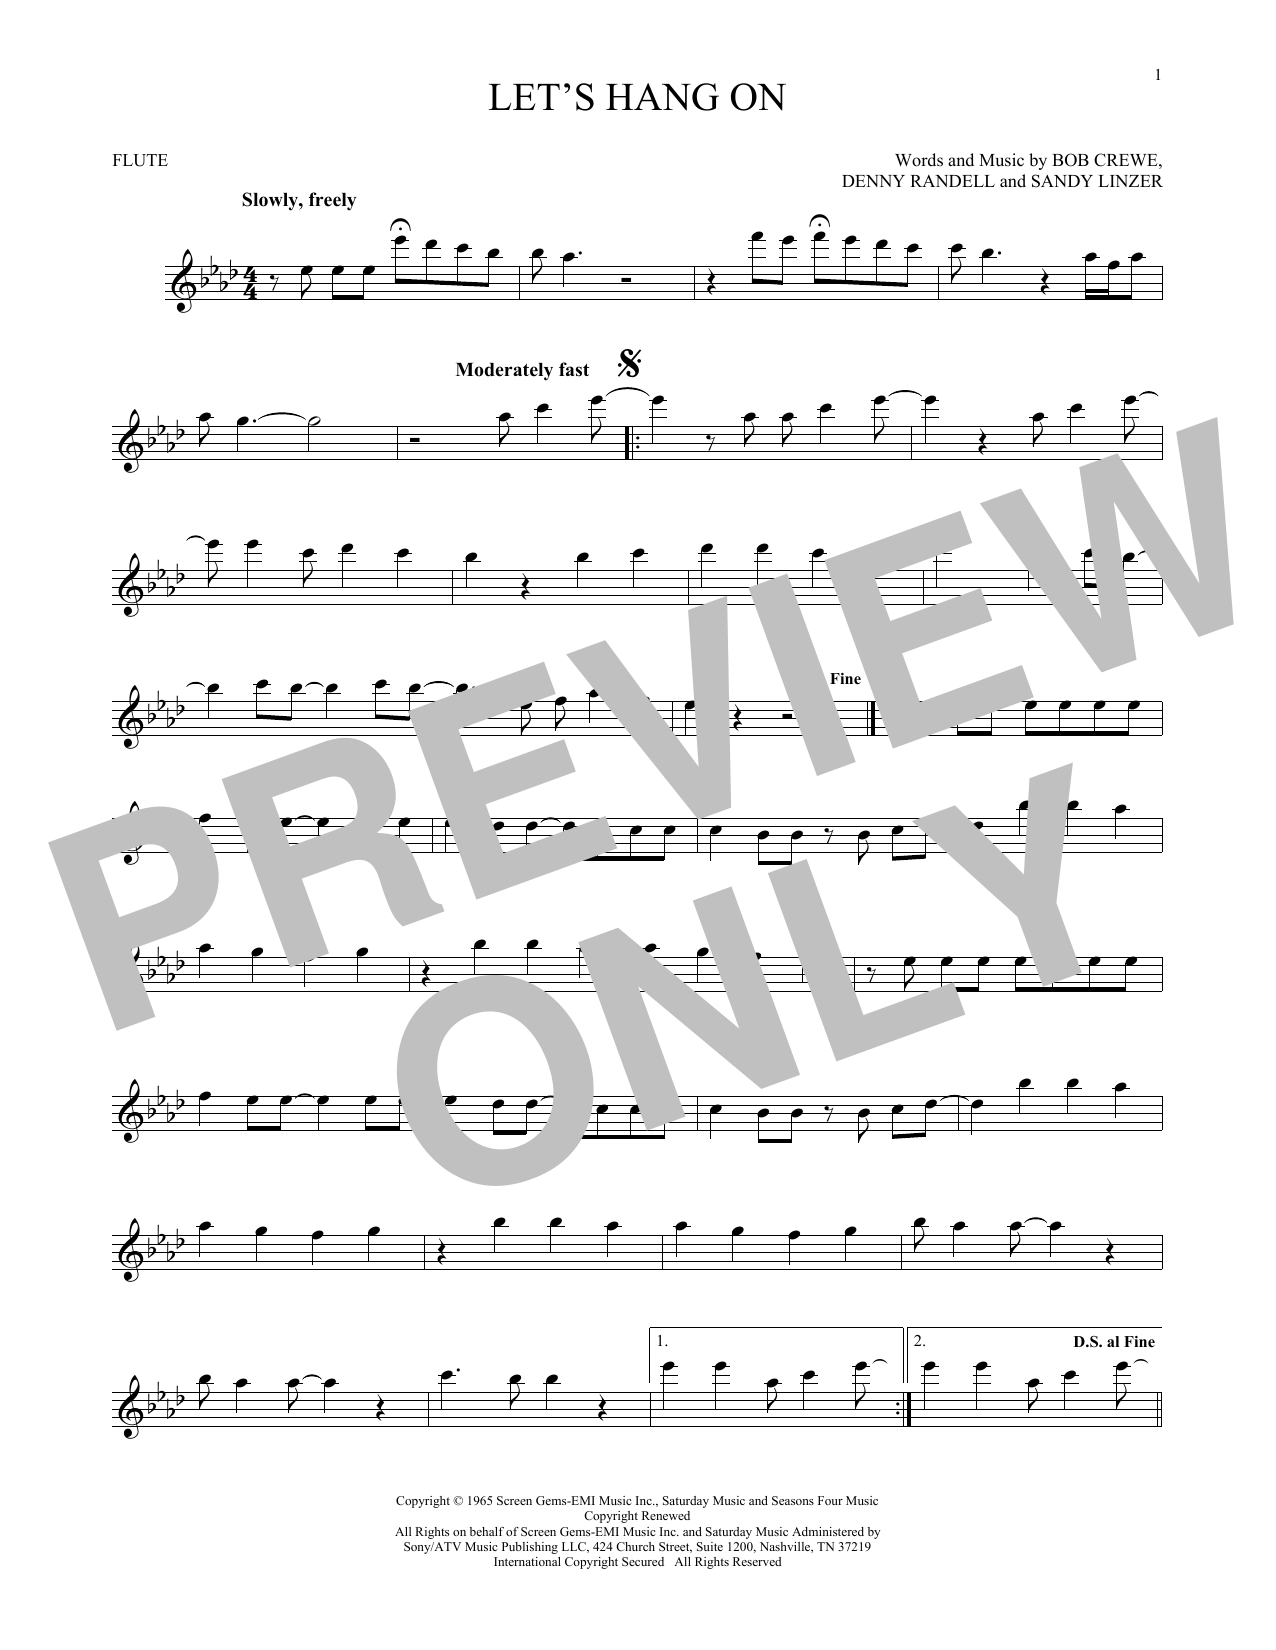 Download The 4 Seasons Let's Hang On Sheet Music